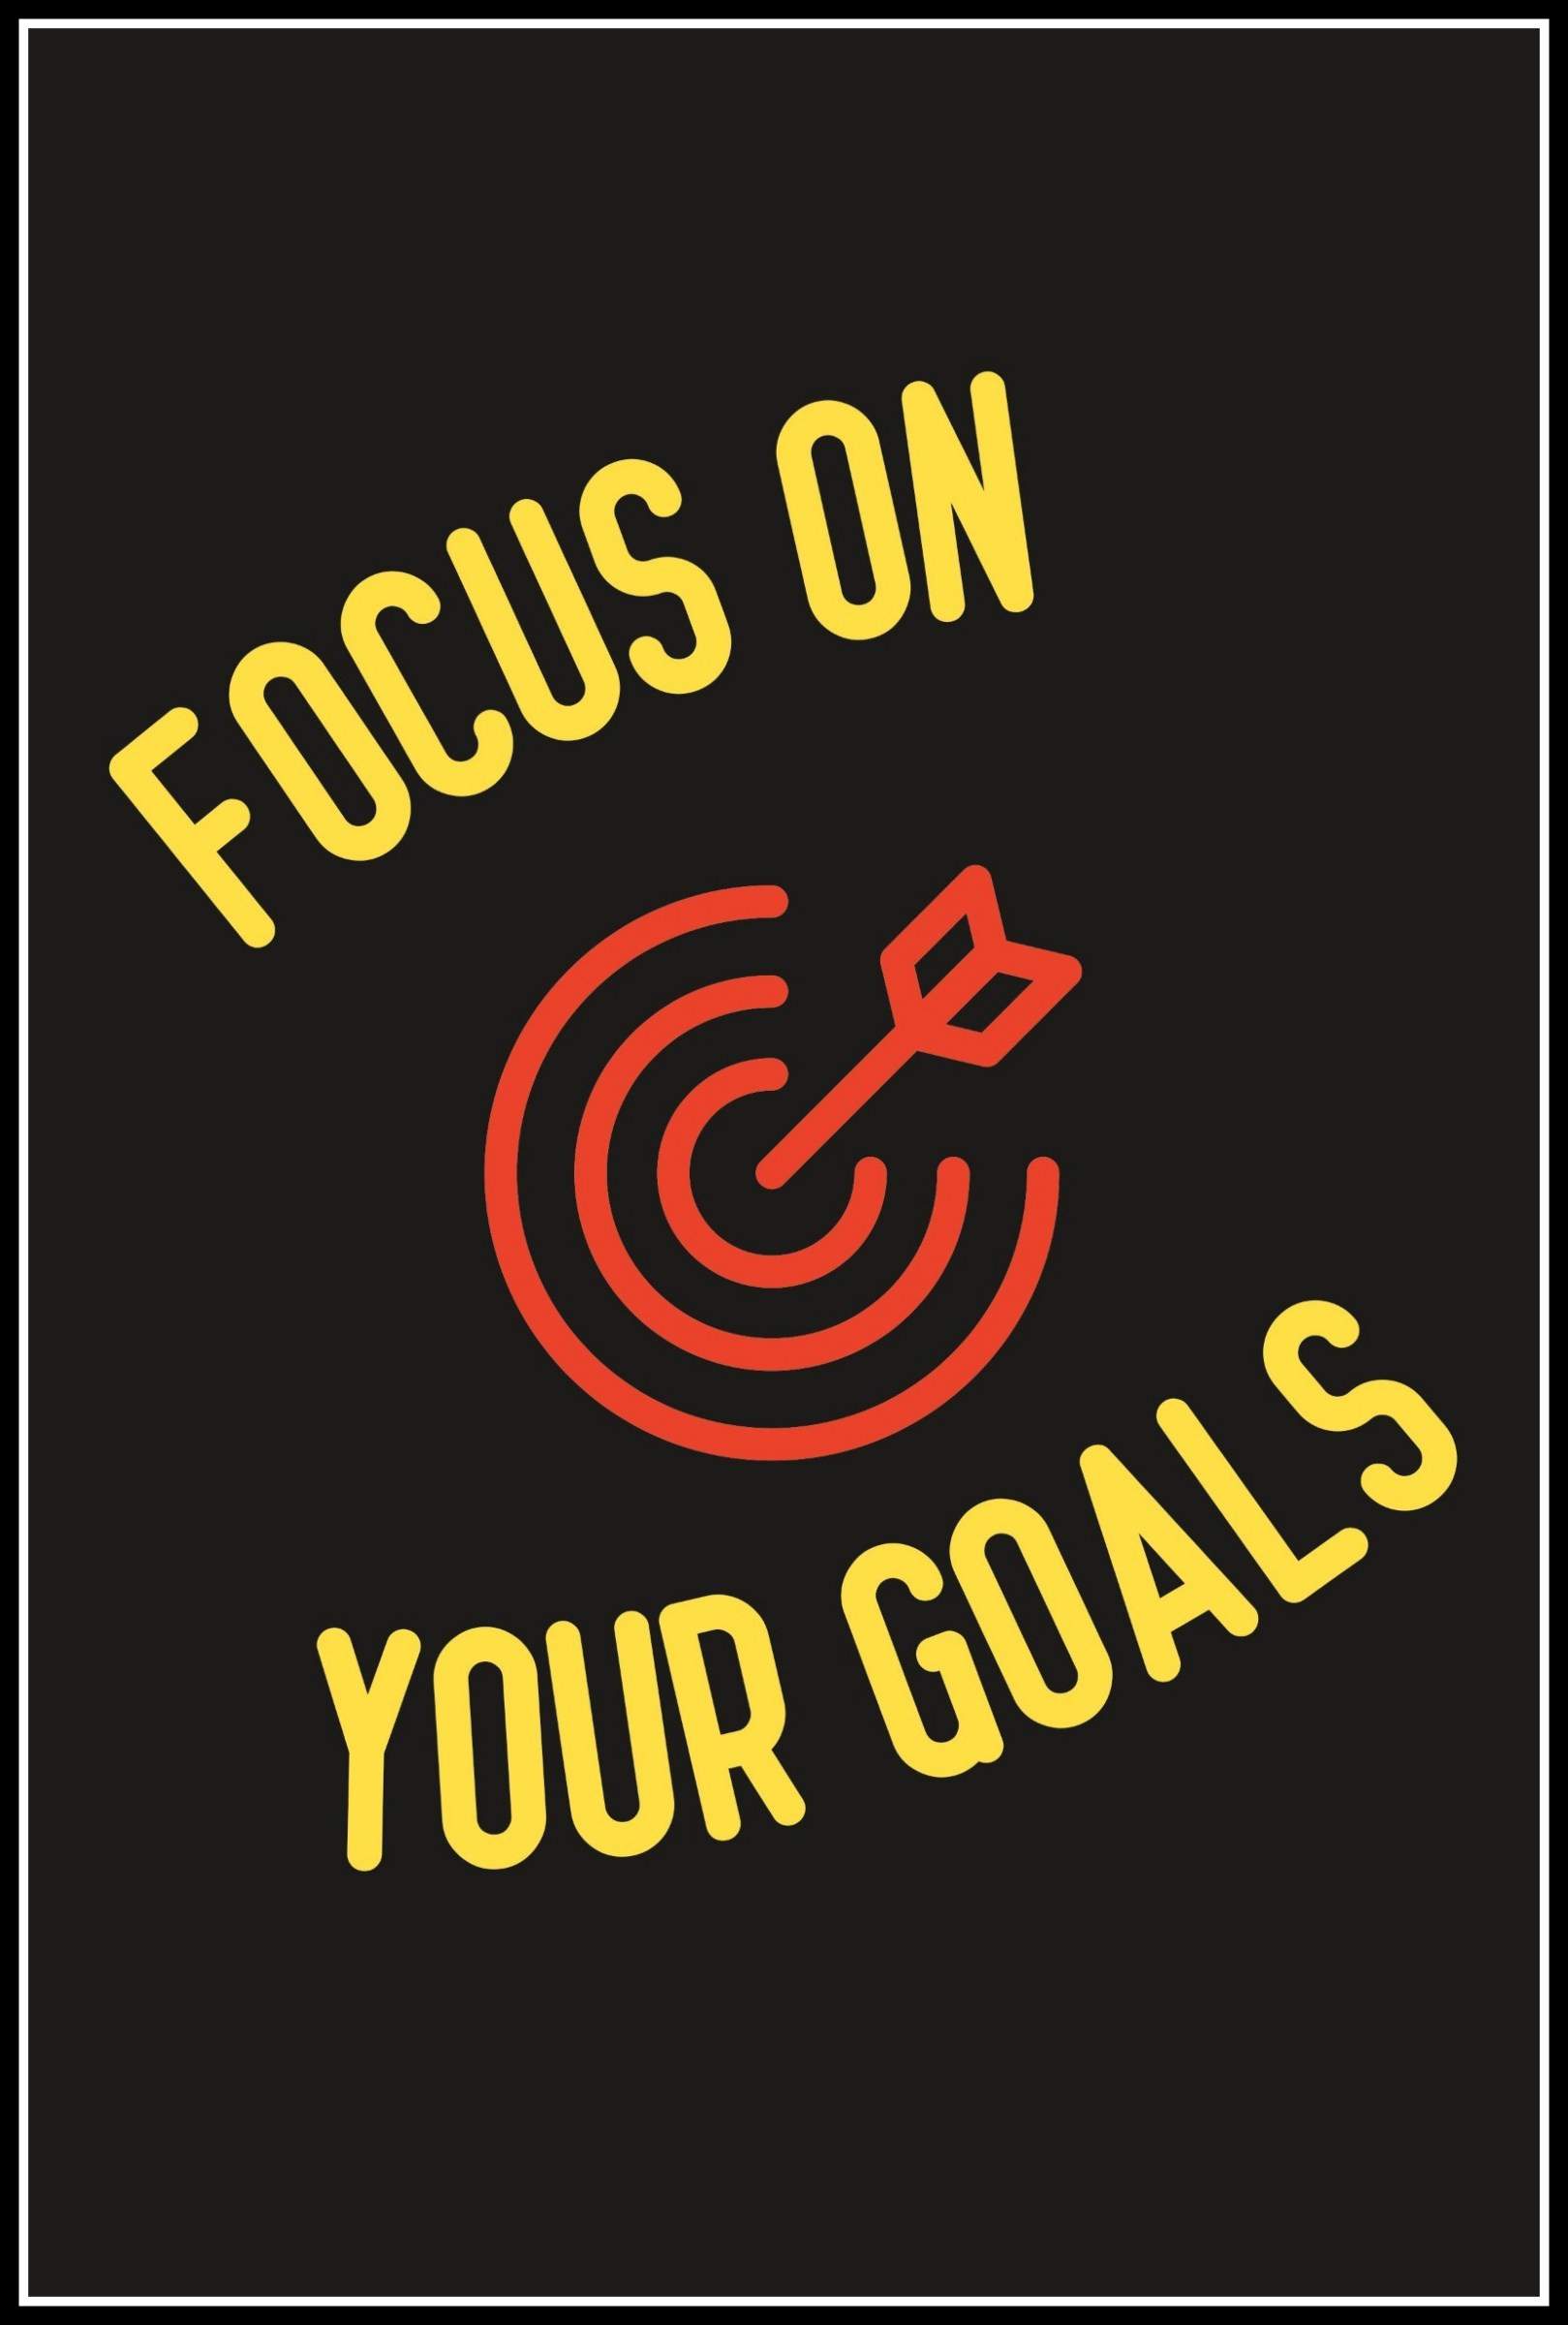 Focus On Your Goals Poster